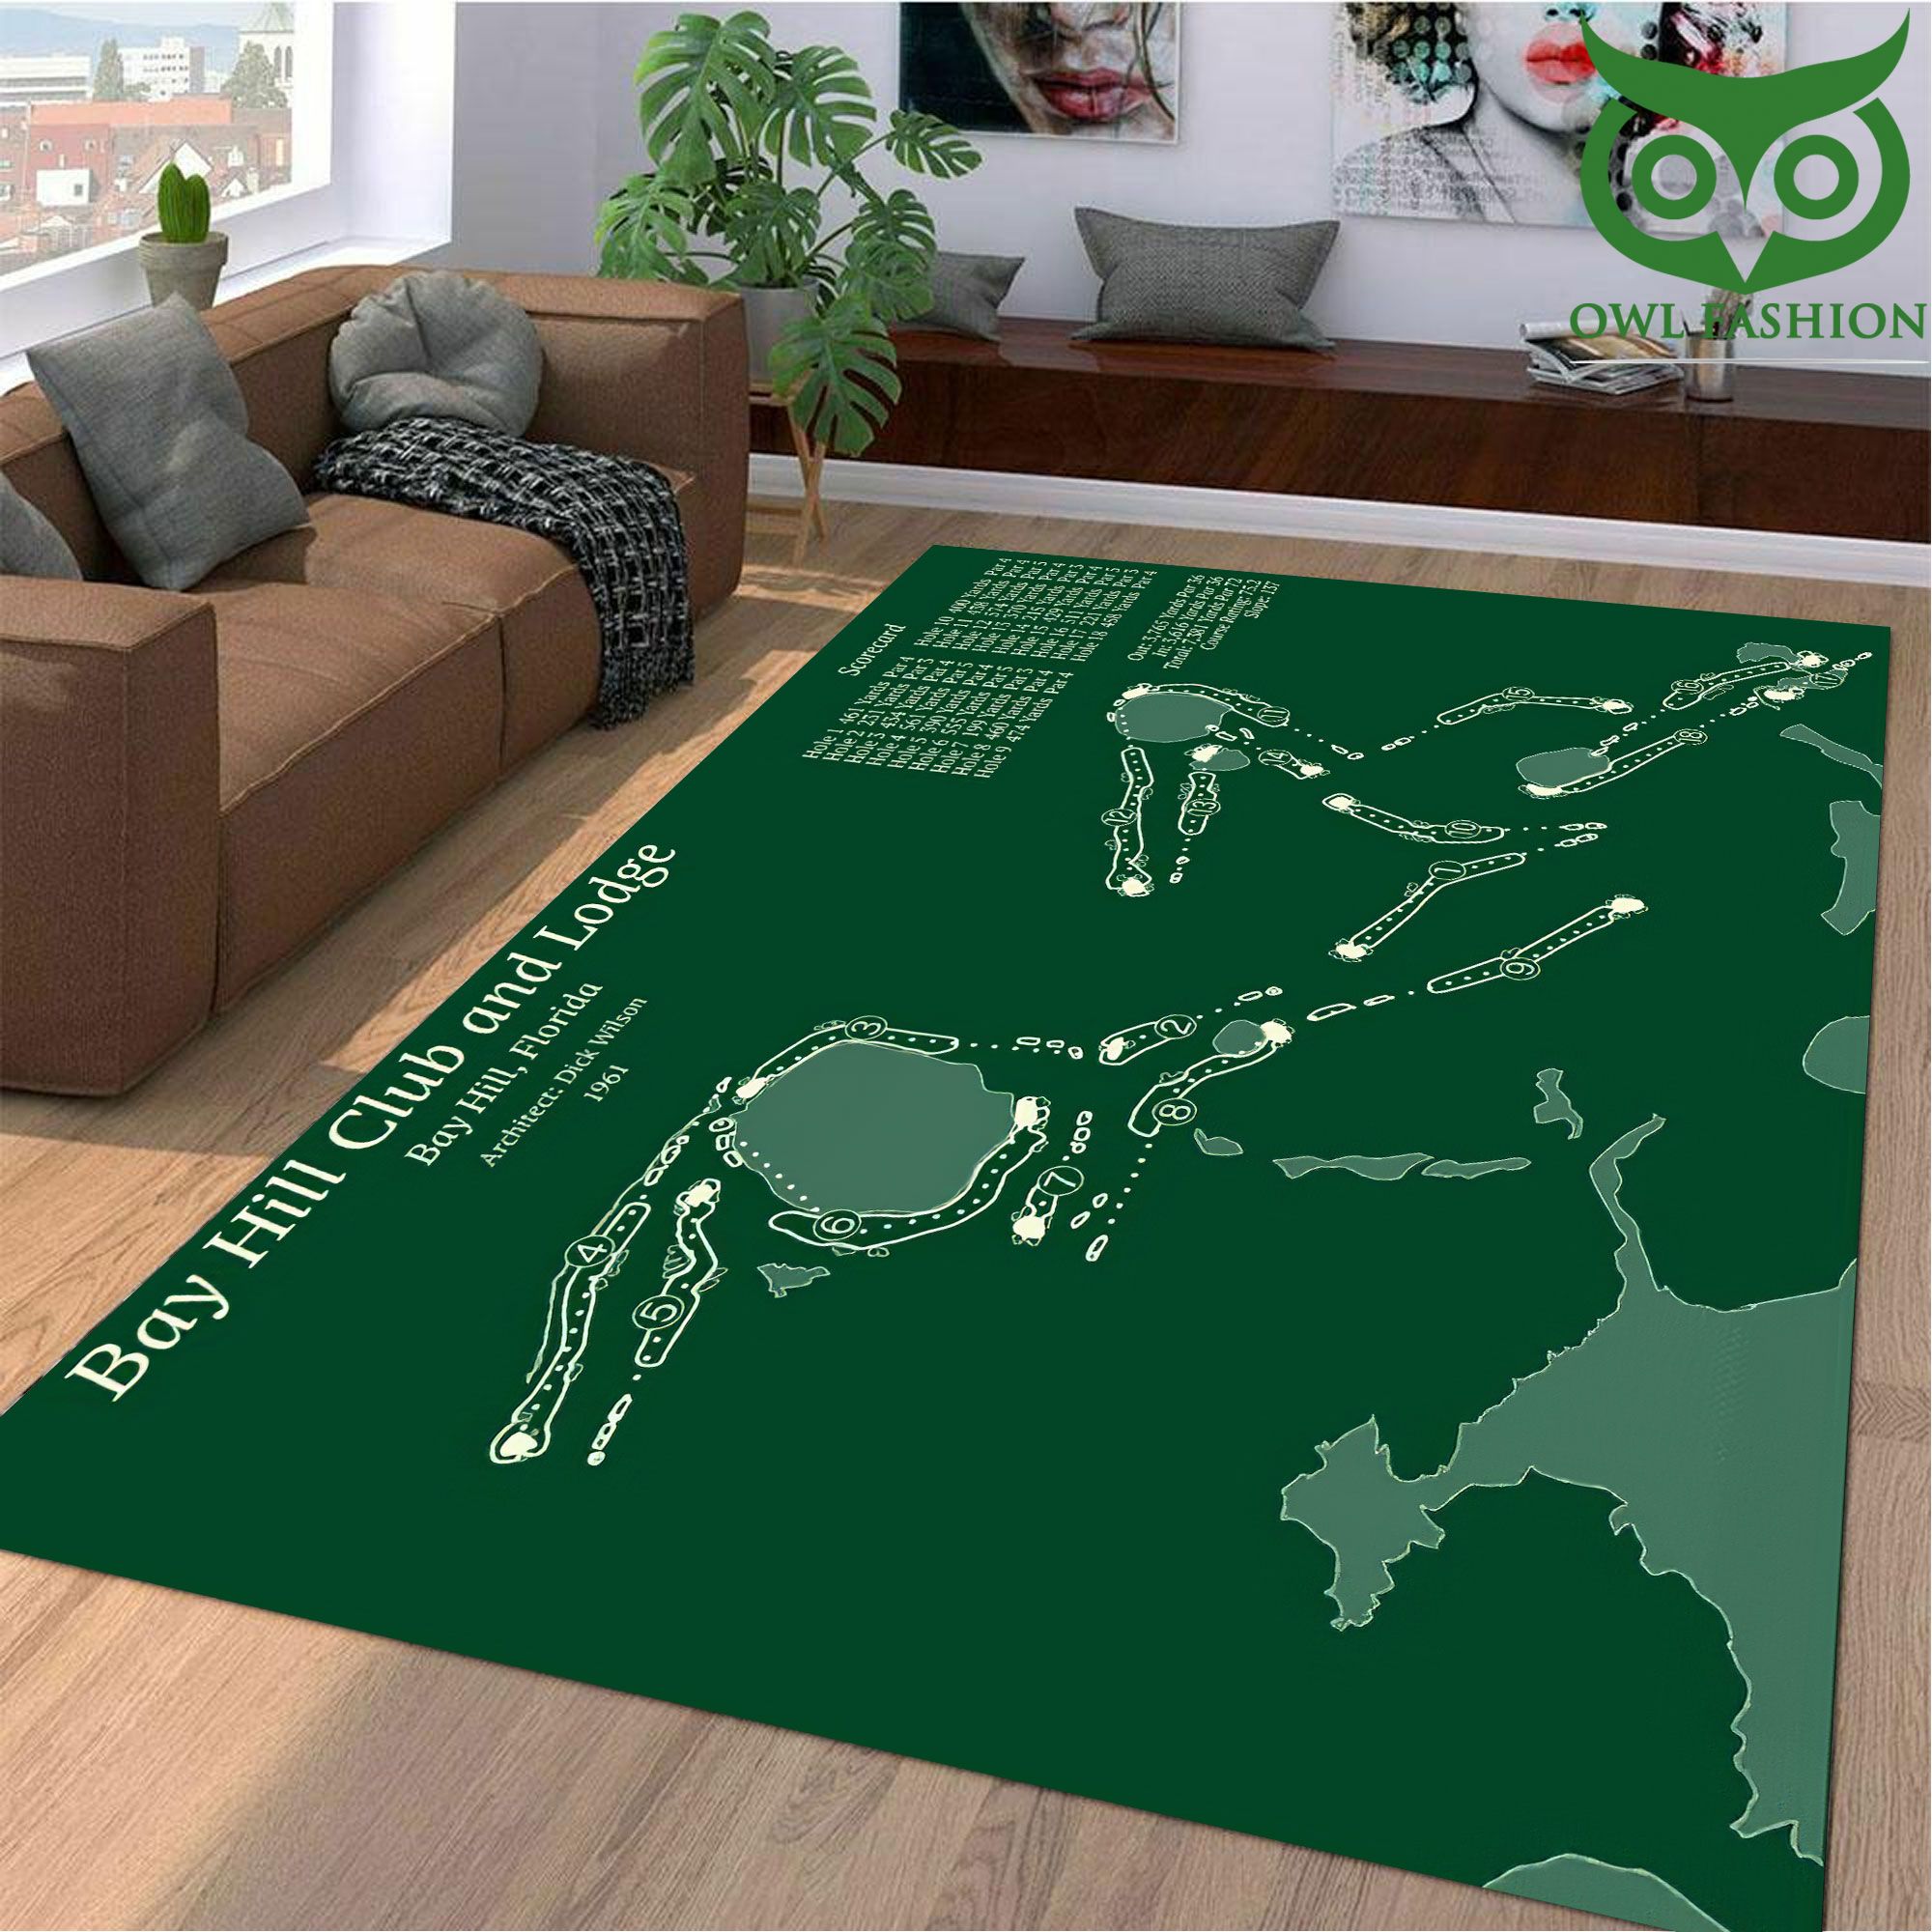 38 Bay Hill Club and Lodge golf course map Printed Carpet Rug